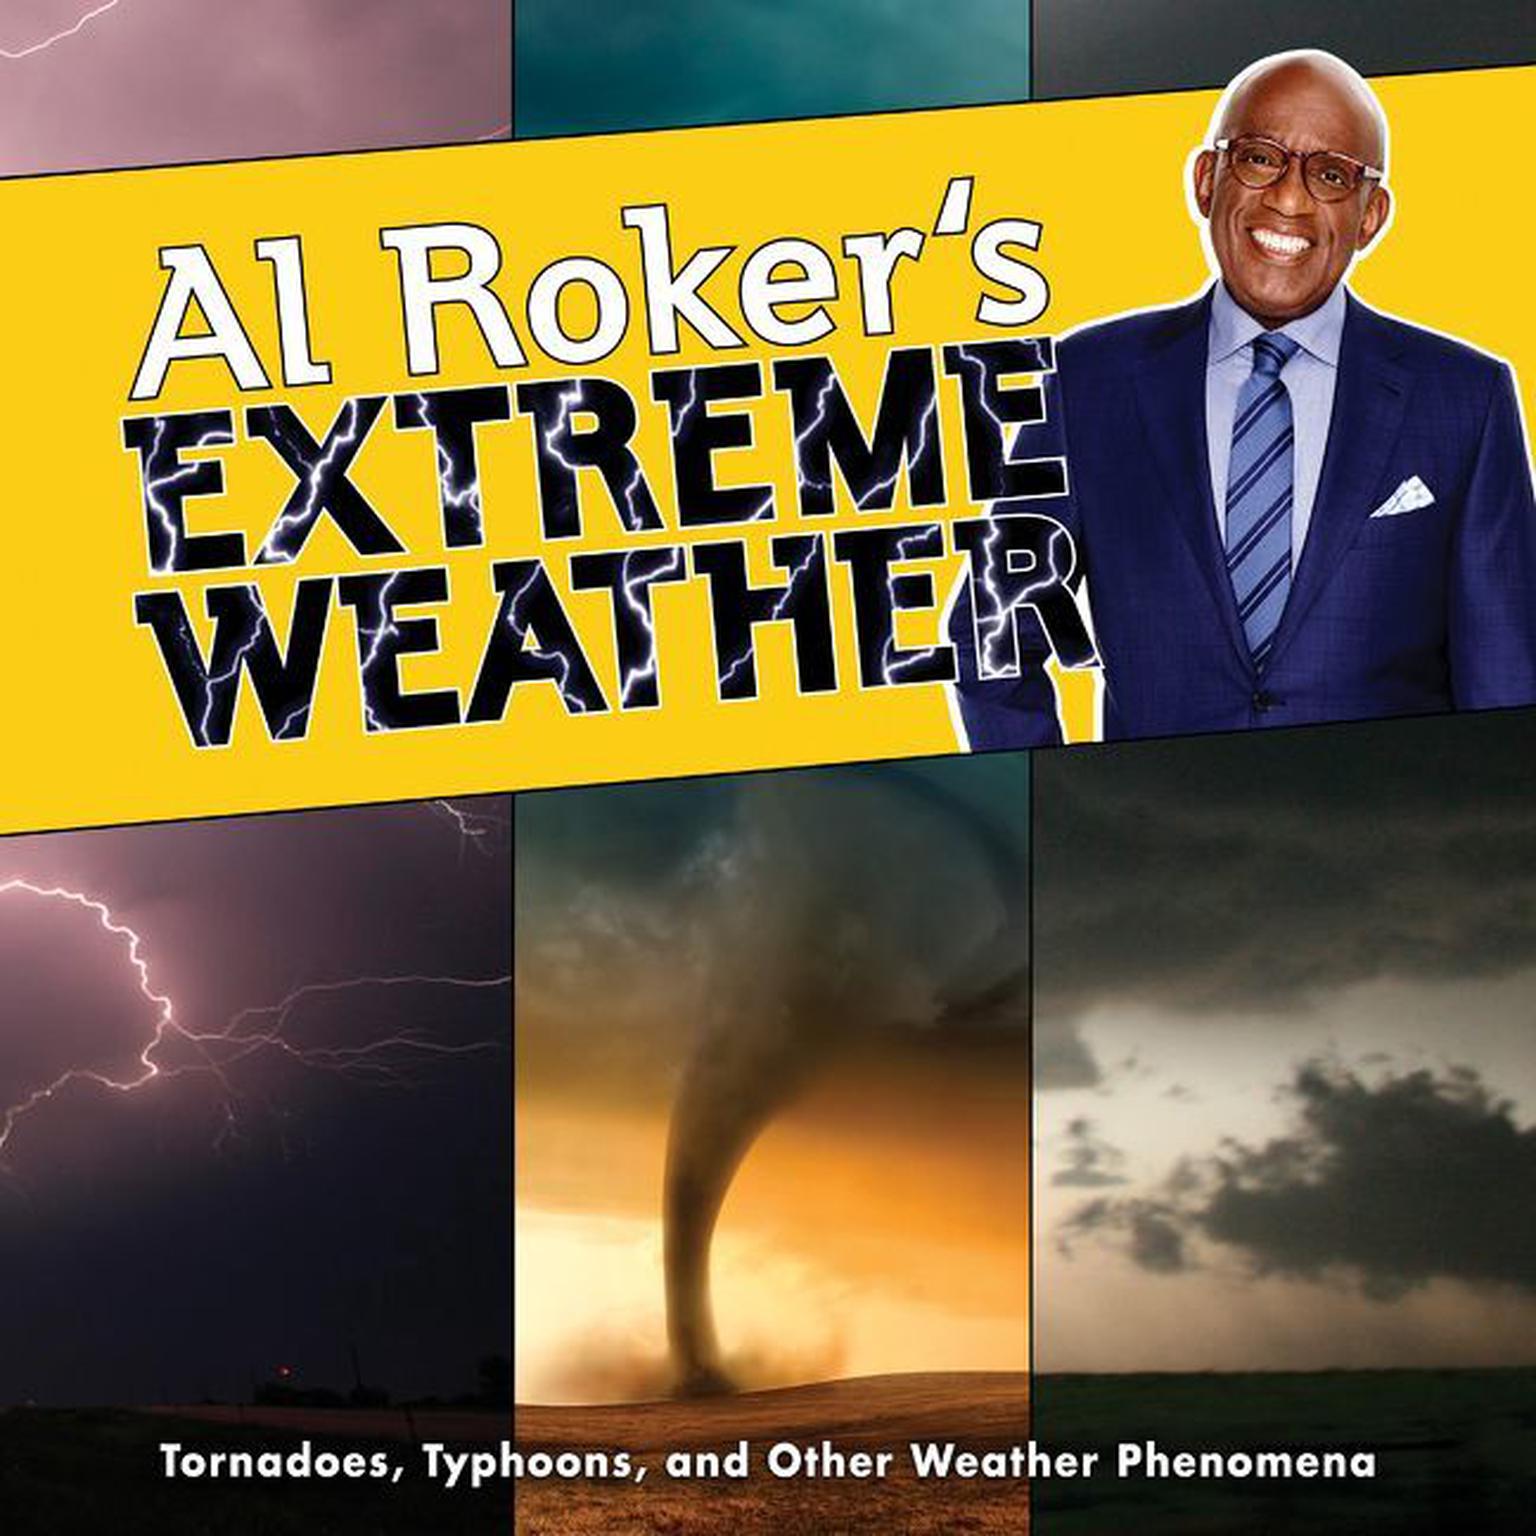 Al Rokers Extreme Weather: Tornadoes, Typhoons, and Other Weather Phenomena Audiobook, by Al Roker